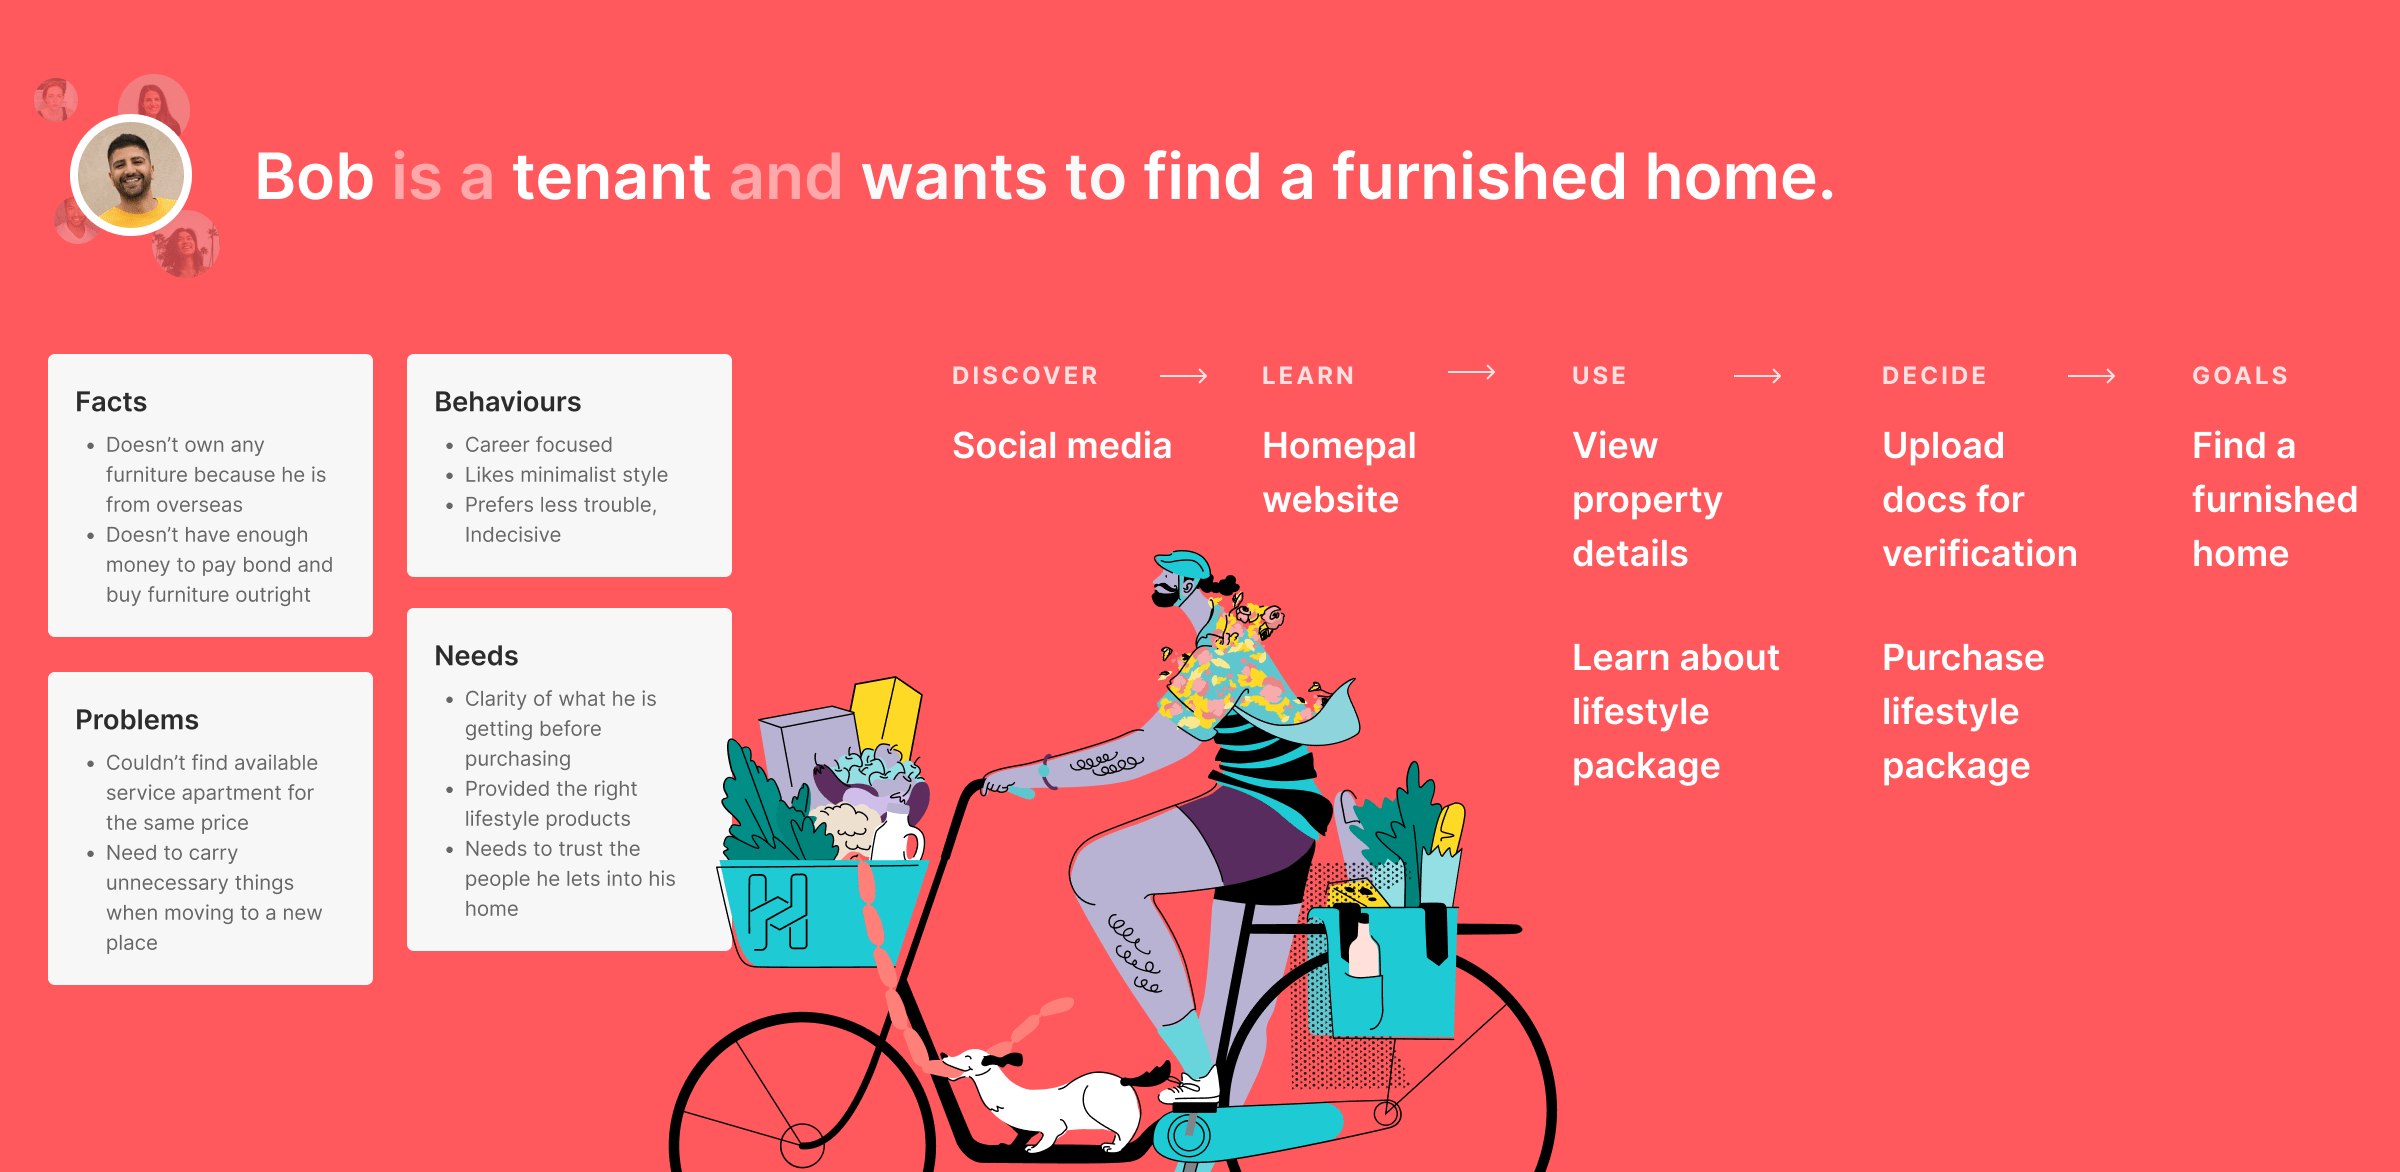 "Bob is a tenant and wants to find a furnished home" accompanying text describes his wants and needs and journey using the app. There is also an illustration of a man on a bike.